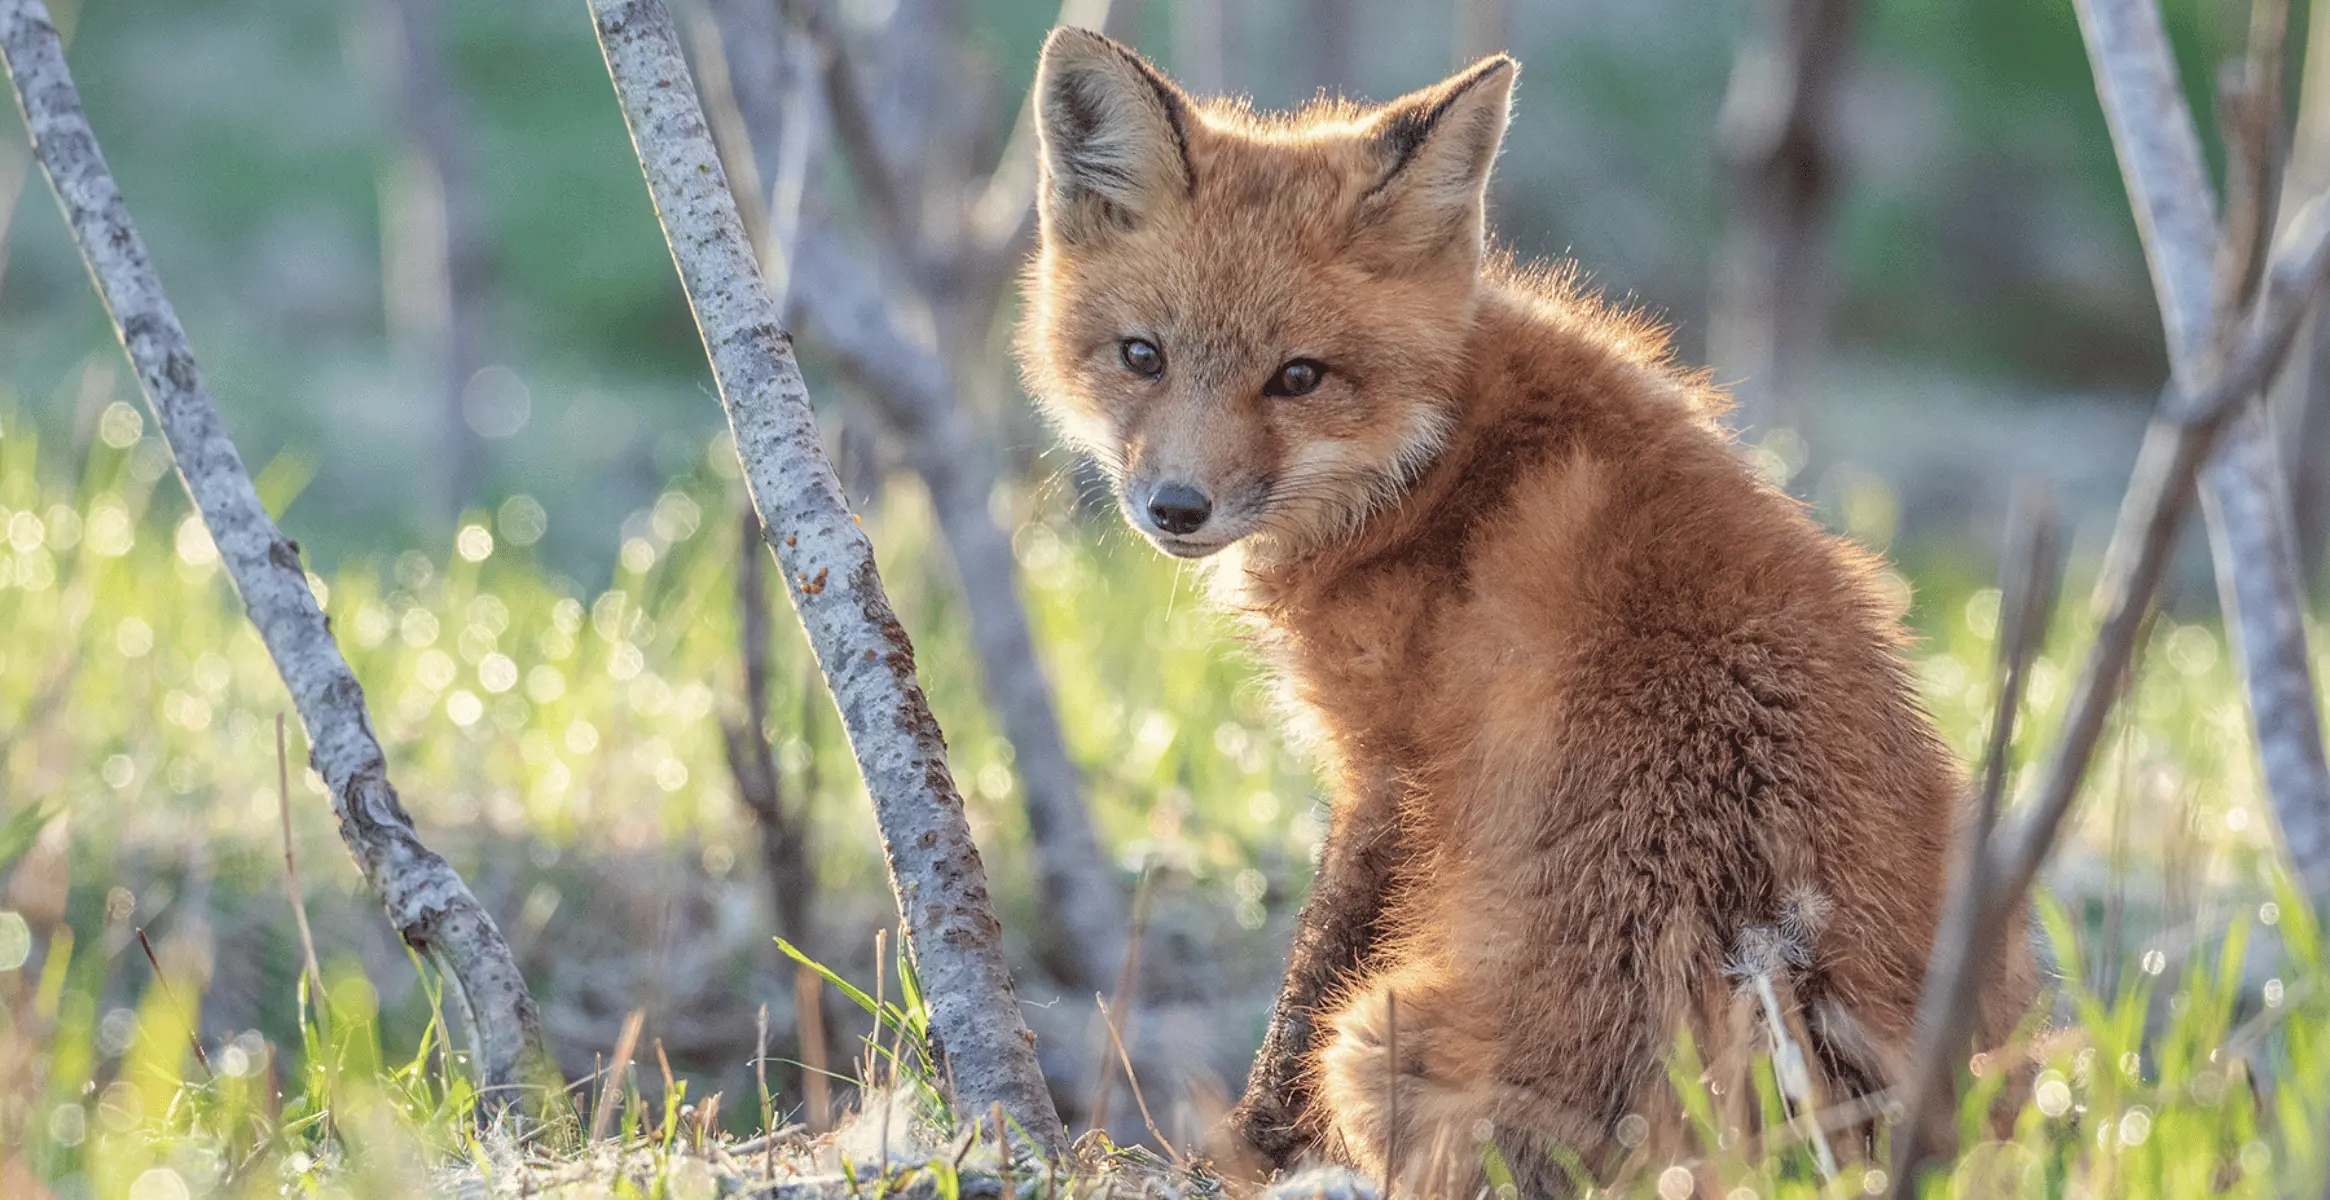 An image of a red fox